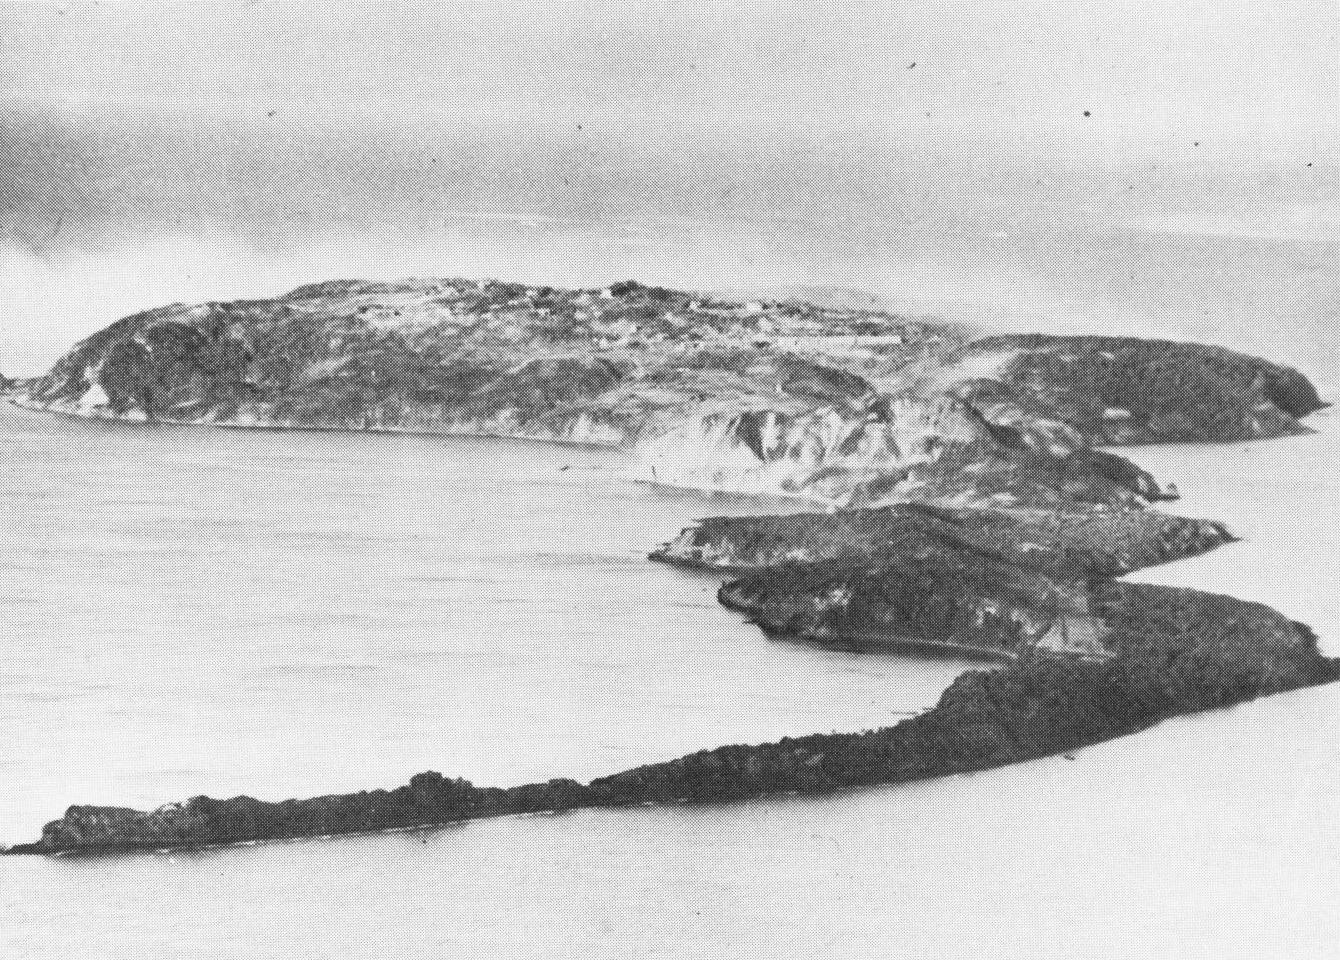 An aerial photograph of the rocky island of Corregidor, home to the underground headquarters of Fort Mills. This view from the east shows the narrow peninsula on which Japanese invasion forces landed. (U.S. Army photograph)